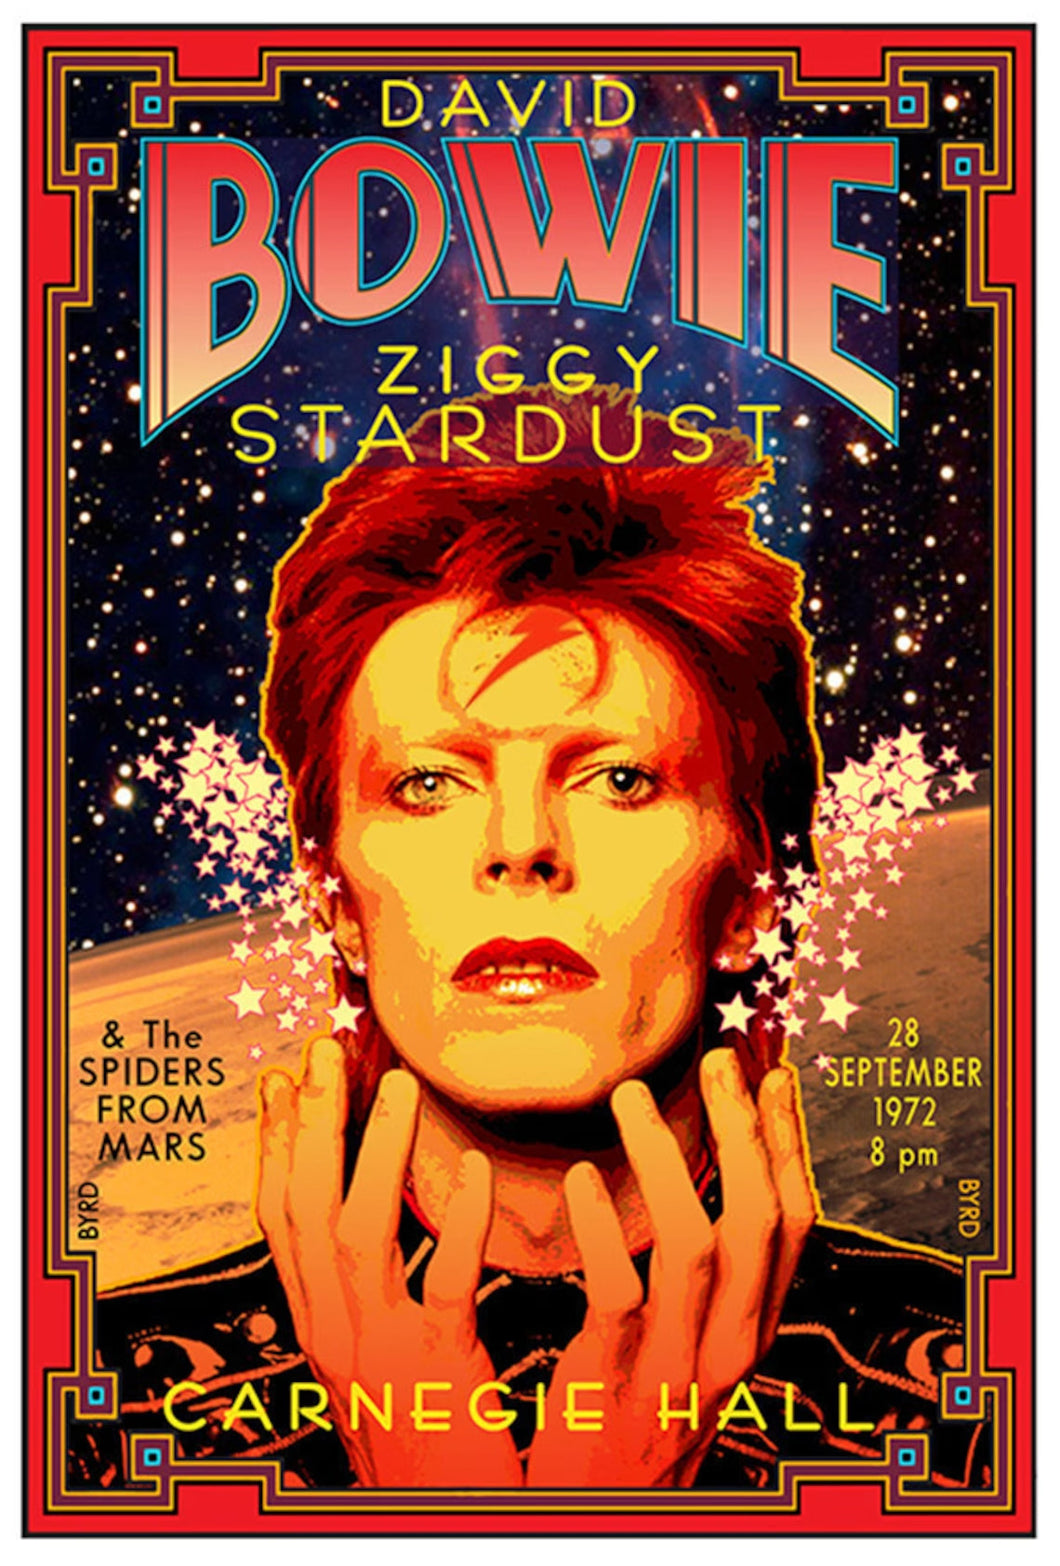 David Bowie - Carnegie Hall 1972 (Poster)